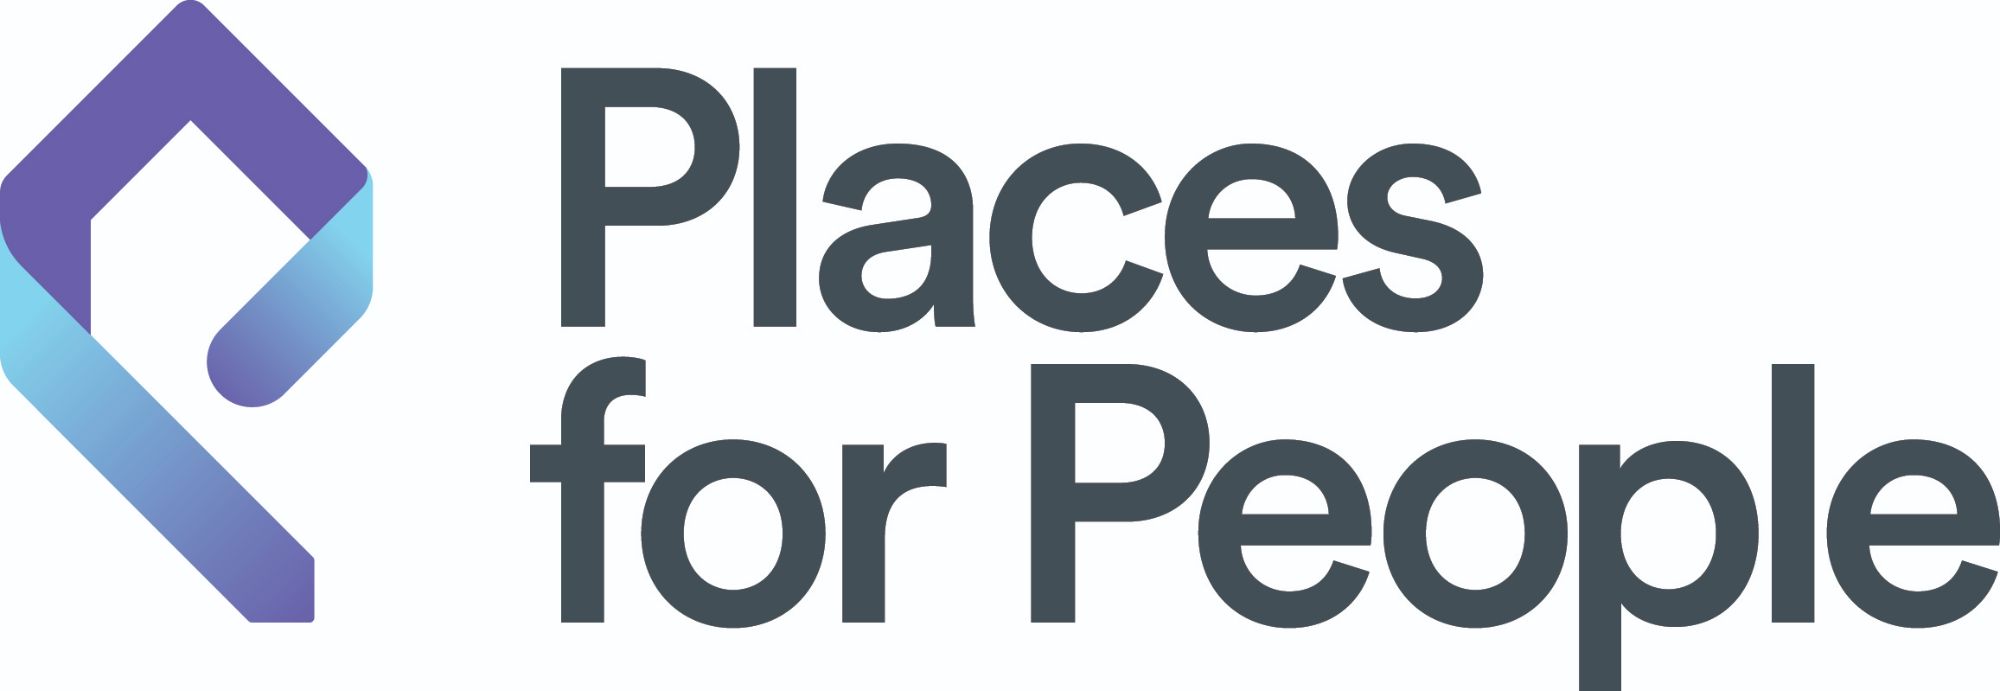 ƒ Places for People Group Primary CMYK.jpg